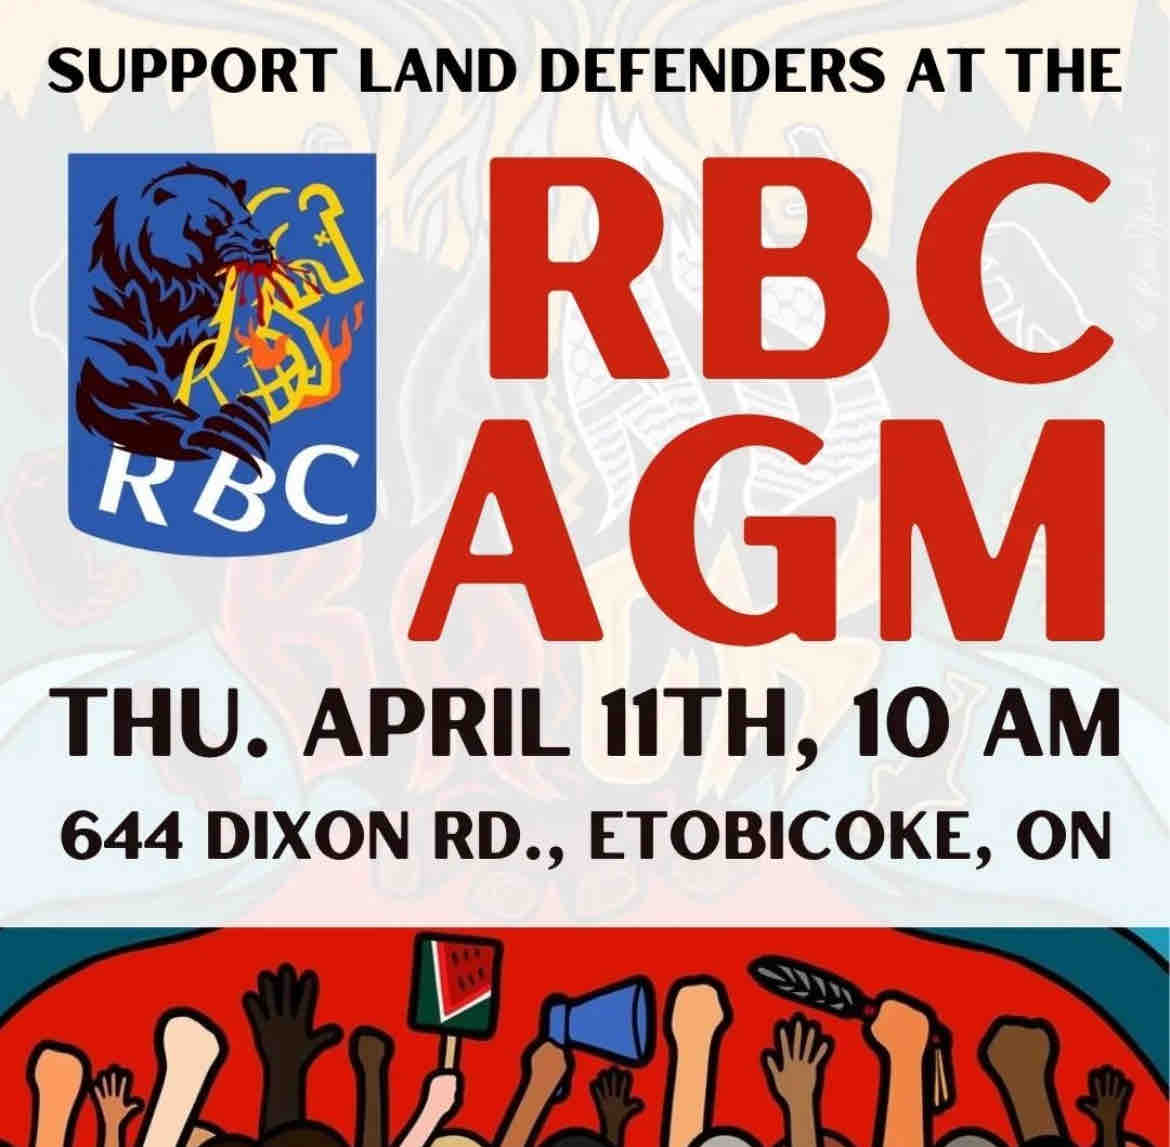 TODAY @ 10:30 AM! Join us in solidarity with land and water defenders at @rbc’s AGM! Bring your umbrellas ☔️ & bring your pots and pans to MAKE SOME NOISE! 

#RBCIsKillingMe #NoMoreDirtyBanks #DivestFromFossilFuels